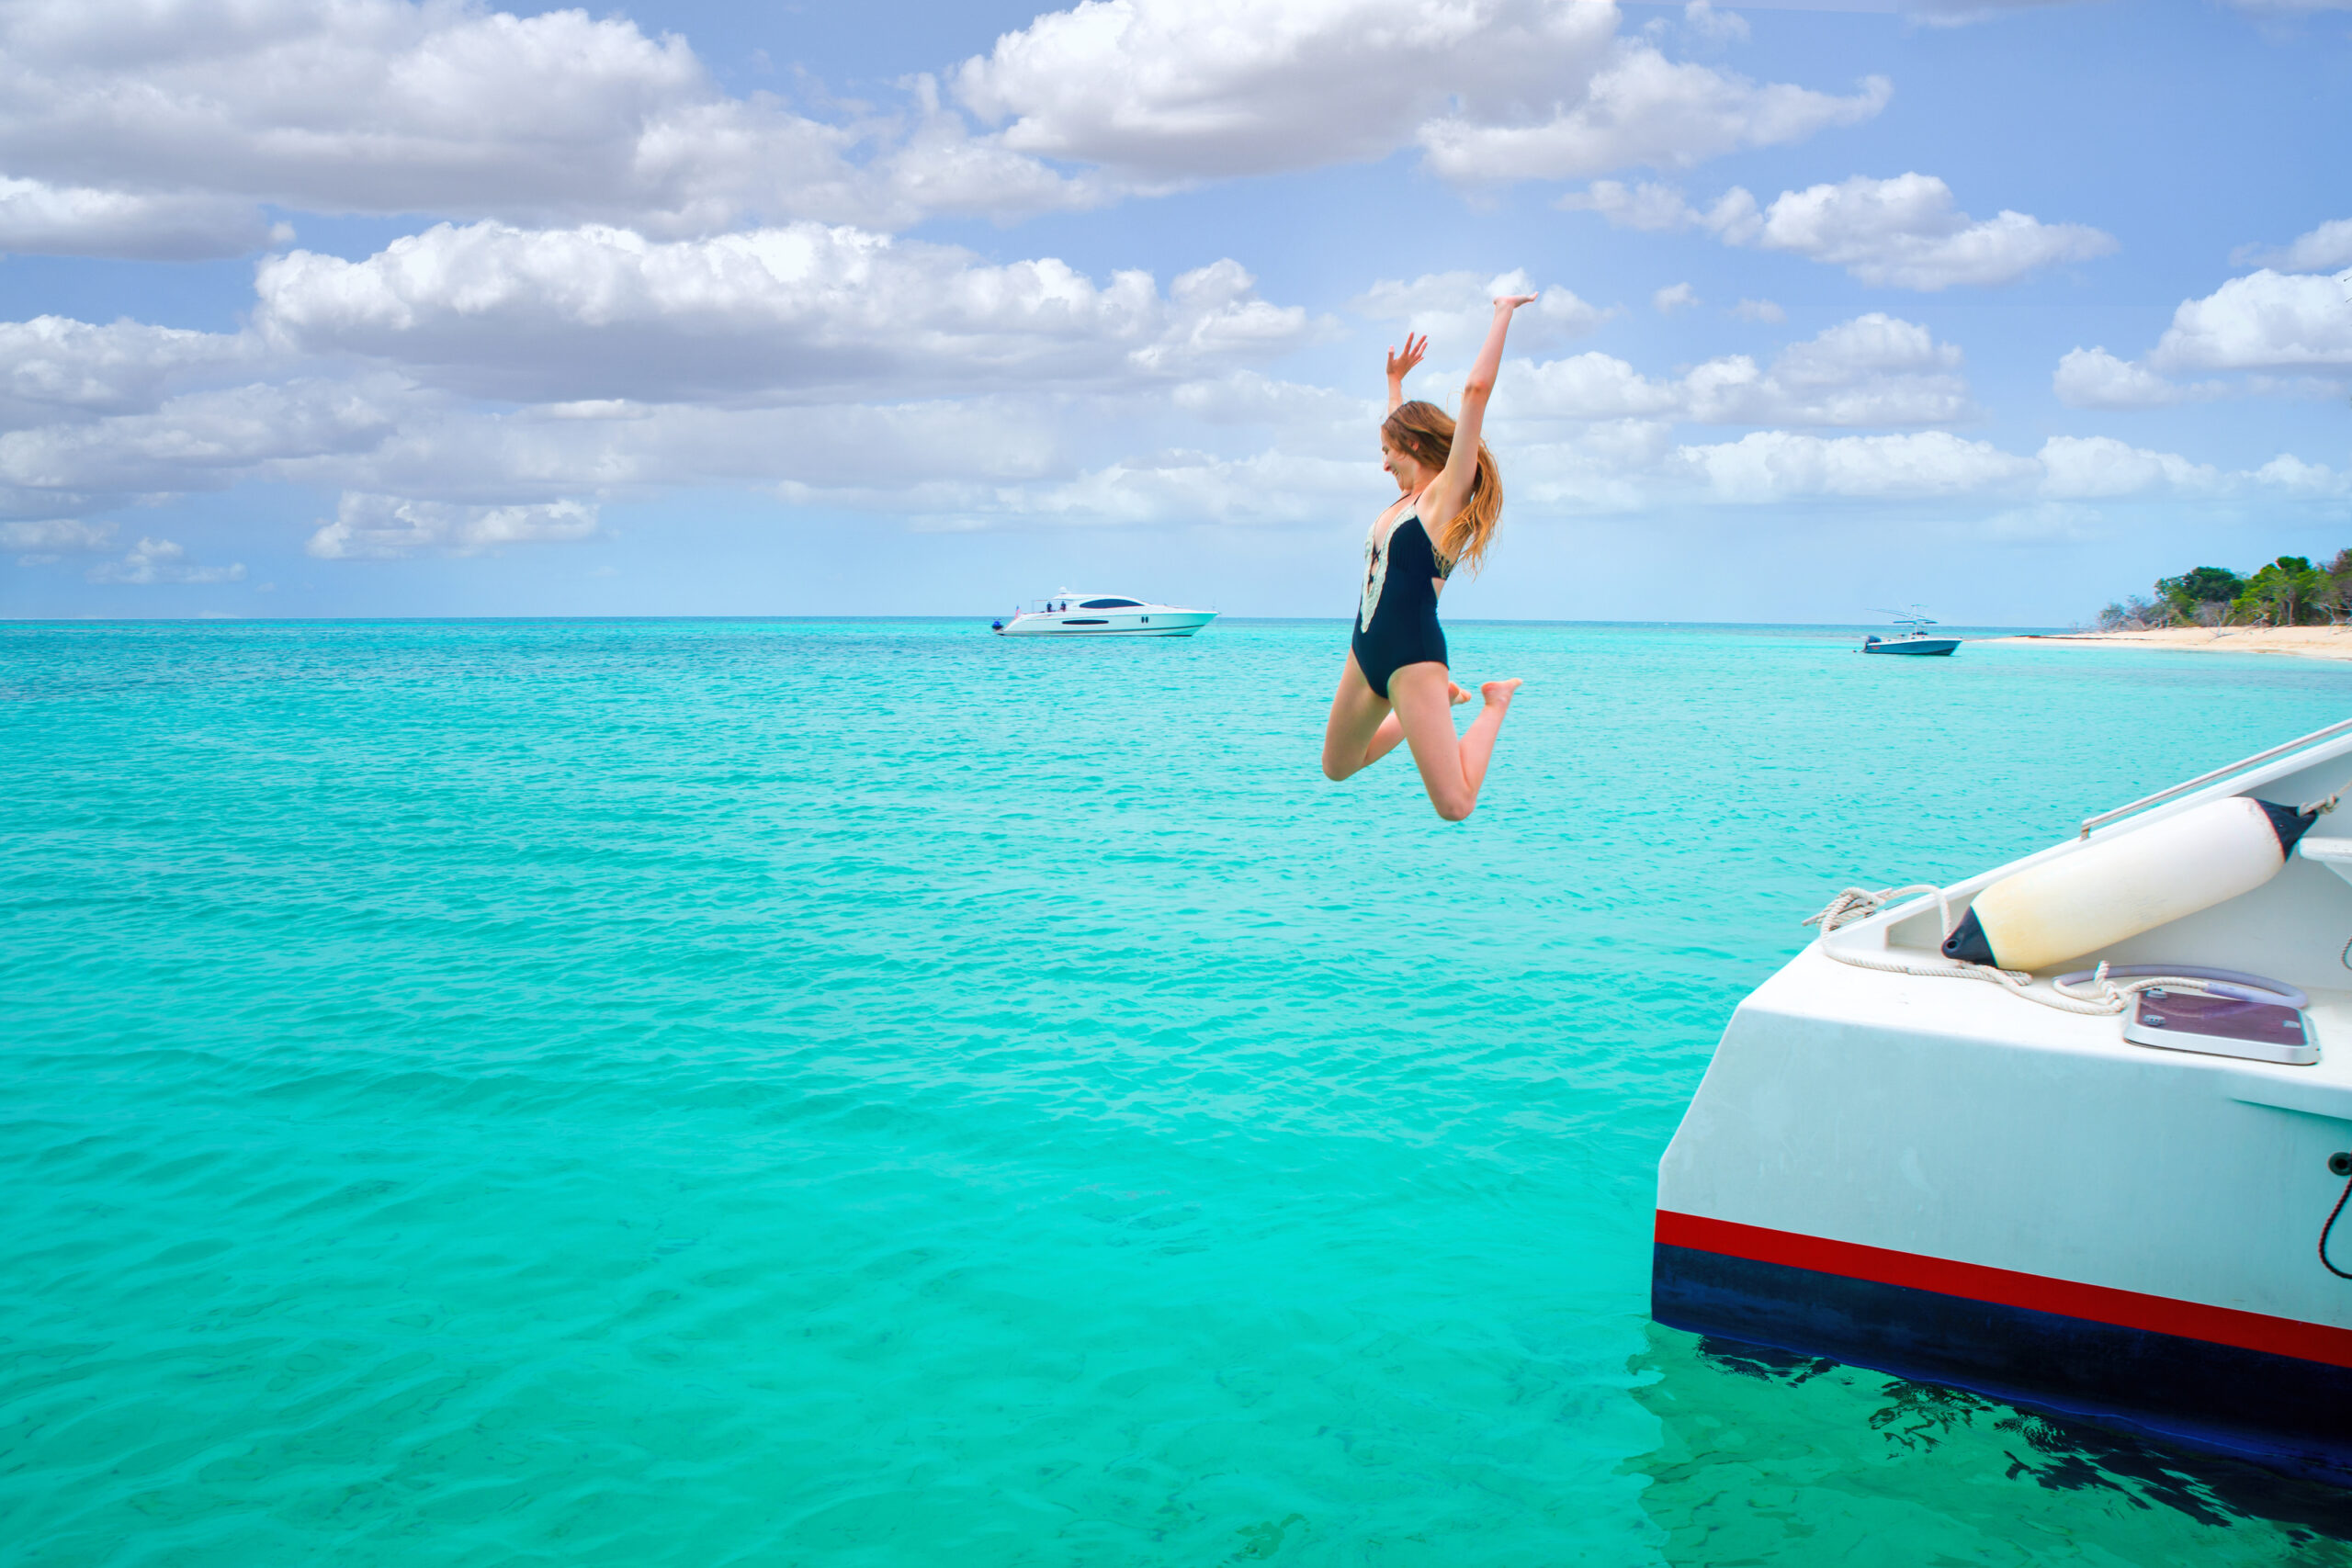 A woman in a black bathing suit jumping into crystal blue water at one of the islands in the USA. In the background you can see boats and a bit of sandy beach. 